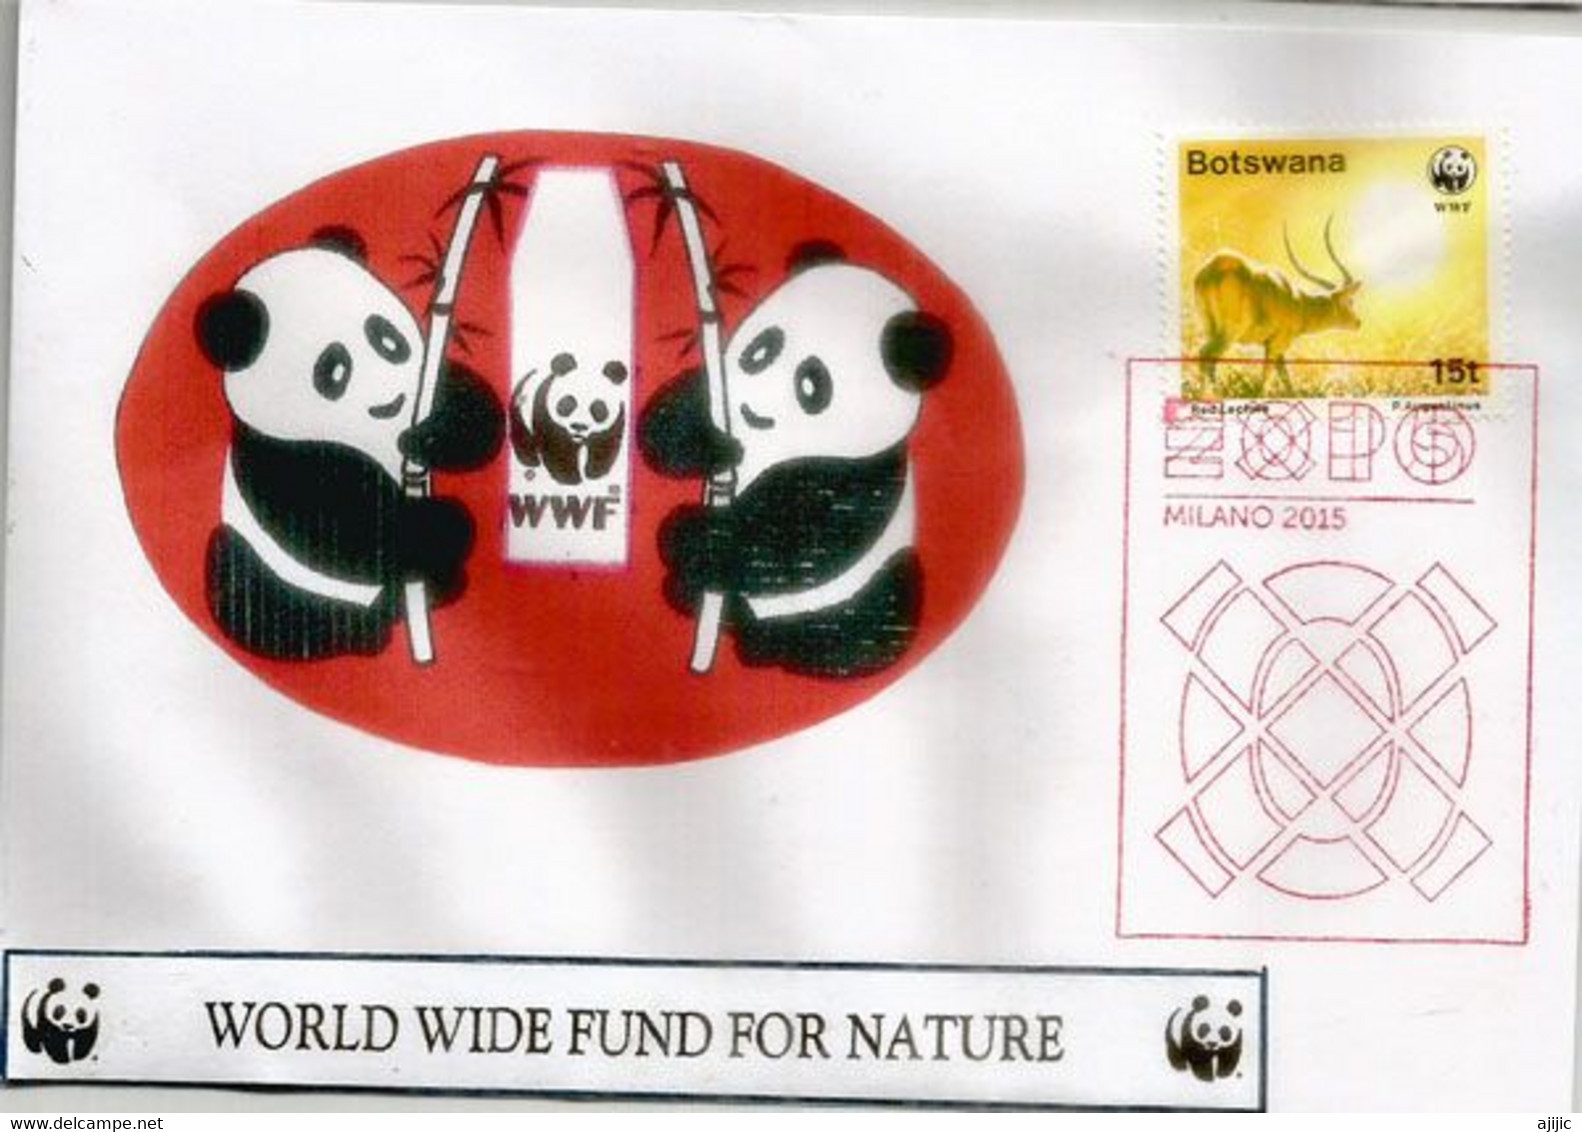 WWF Stamp Antelope Red Lechwe Chobe National Park. Botswana, Lettre WWF Pendant L'EXPO UNIVERSELLE MILAN 2015 - Lettres & Documents